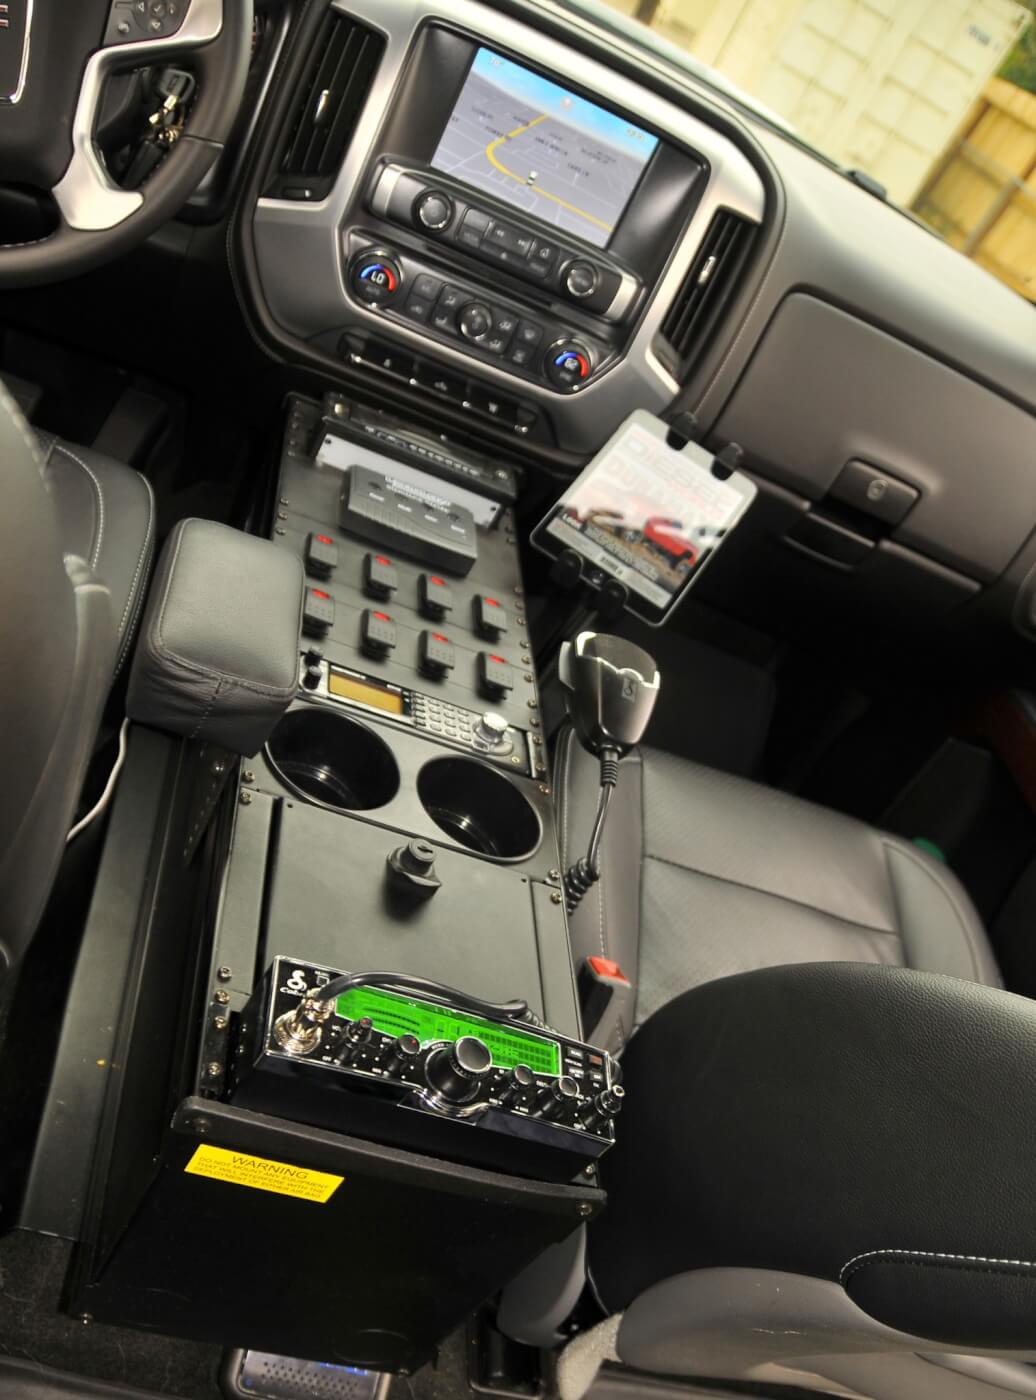 There’s a slew of electronics in the 2015 GMC, including a CB radio, police scanner, iPad and more.